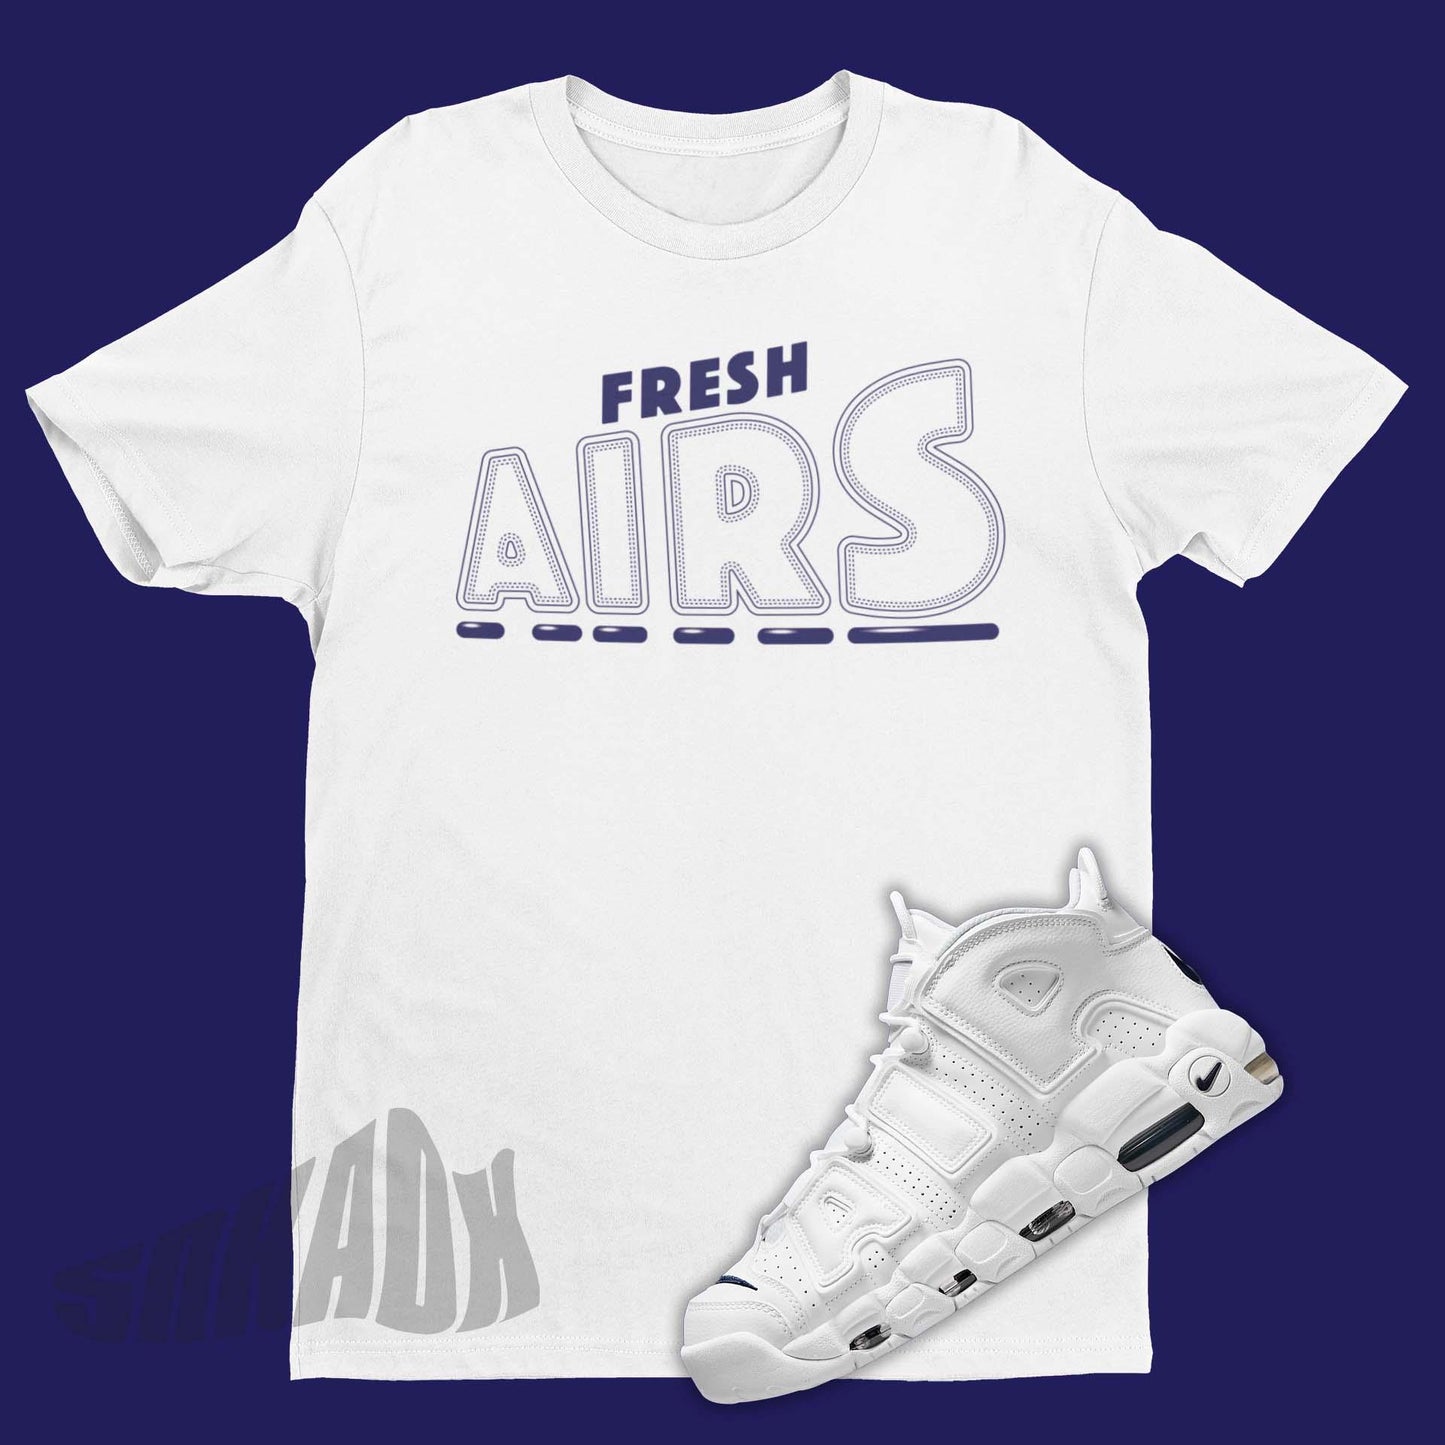 Fresh Airs Shirt To Match Nike Air More Uptempo White Midnight Navy